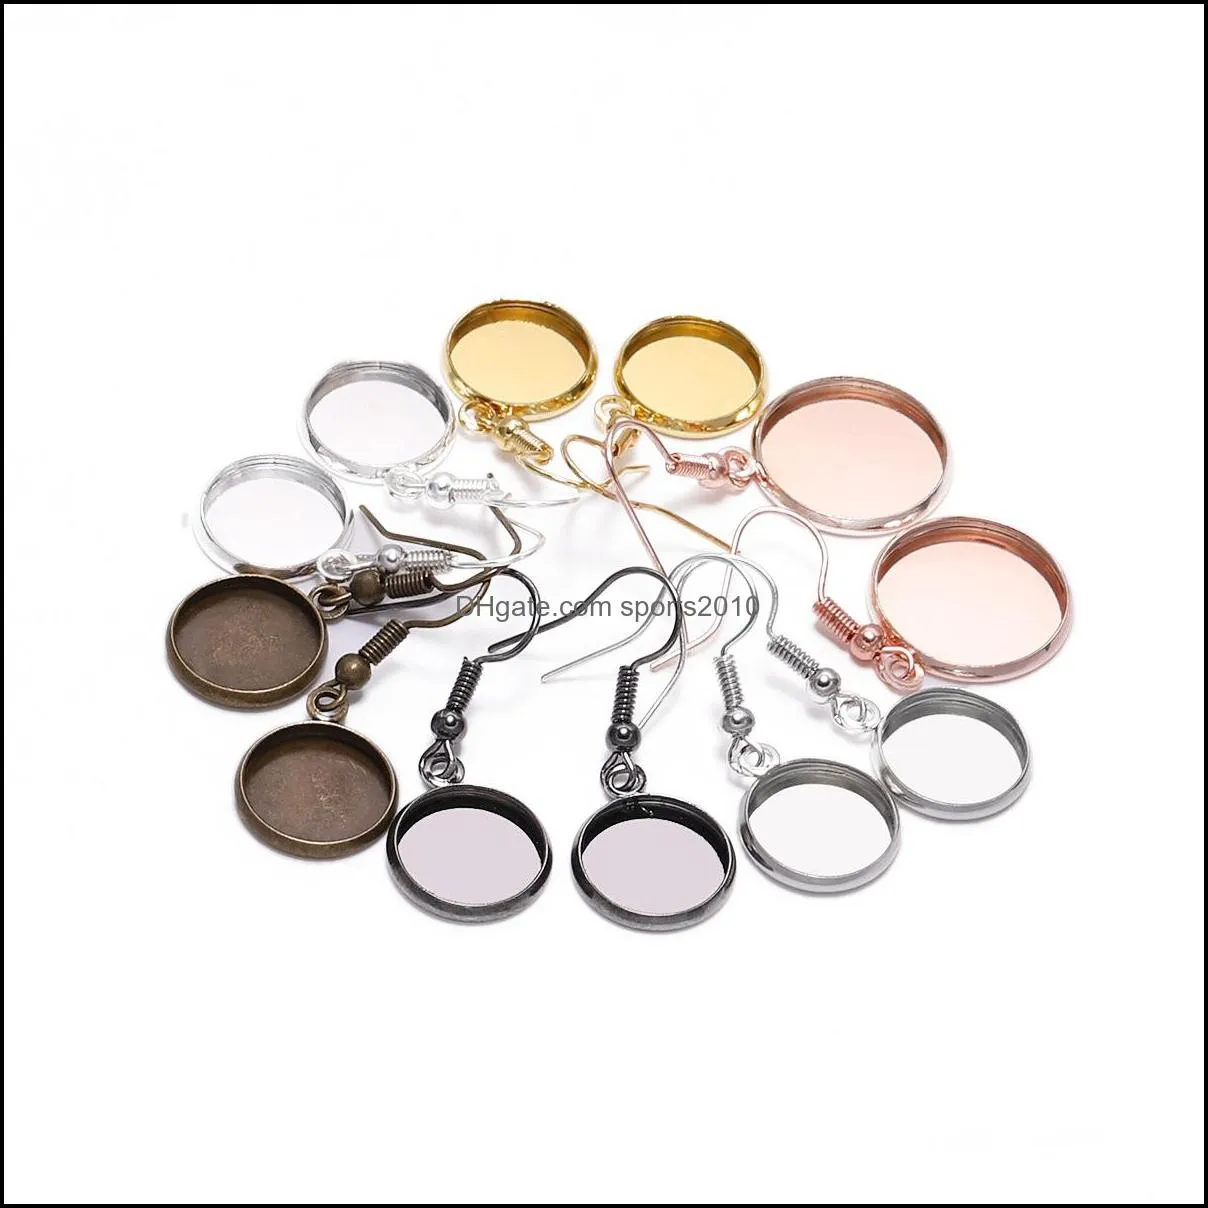 12mm tray bezel cabochon stone earring base hook blank setting components round pendant ear bases findings for diy glass ca sports2010